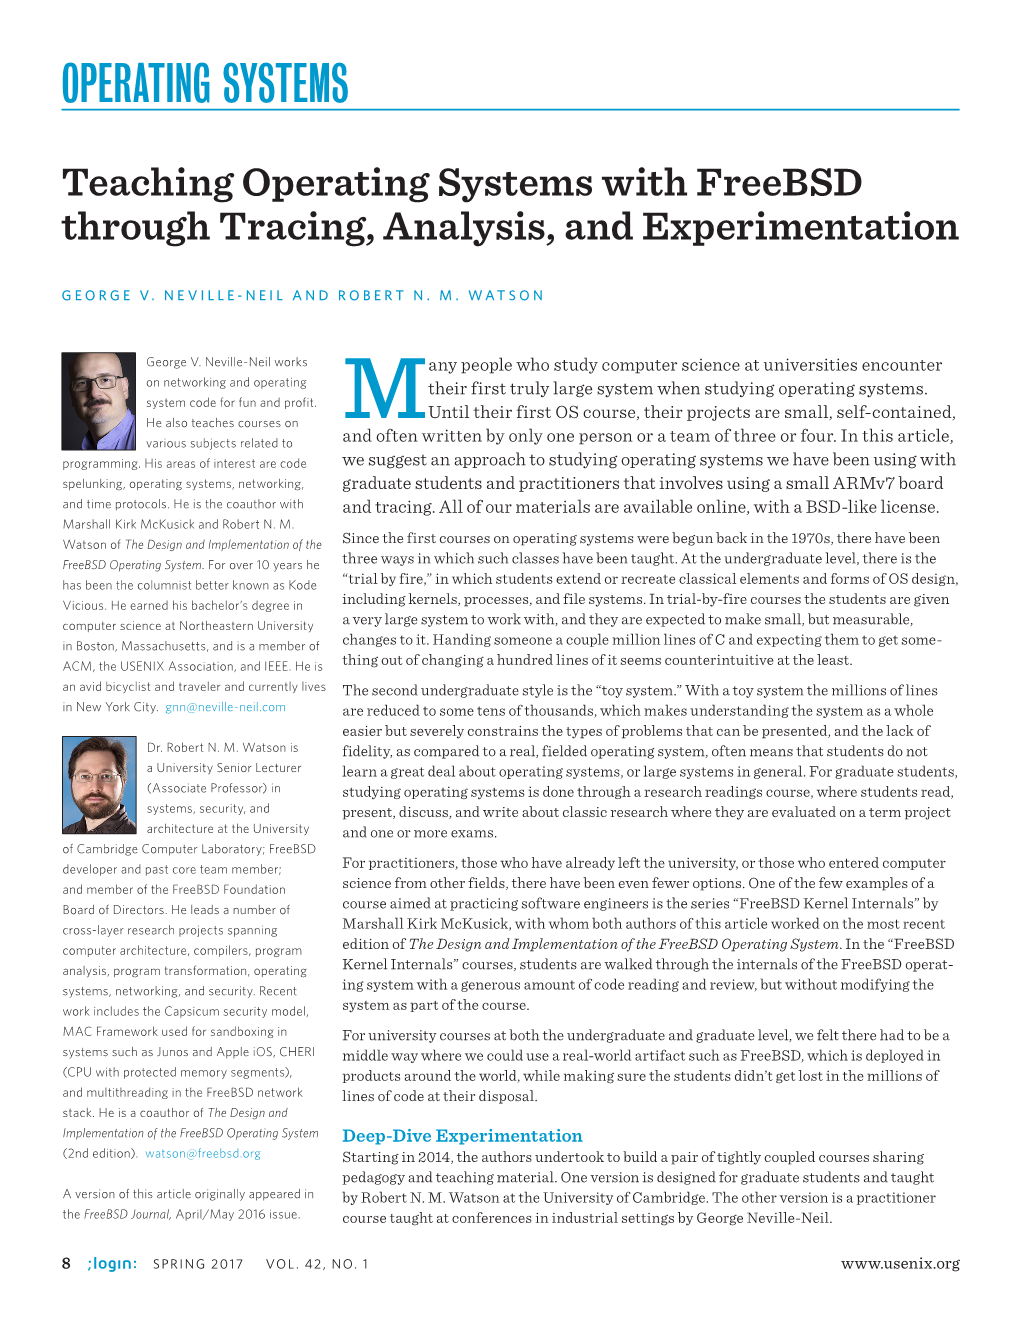 Teaching Operating Systems with Freebsd Through Tracing, Analysis, and Experimentation